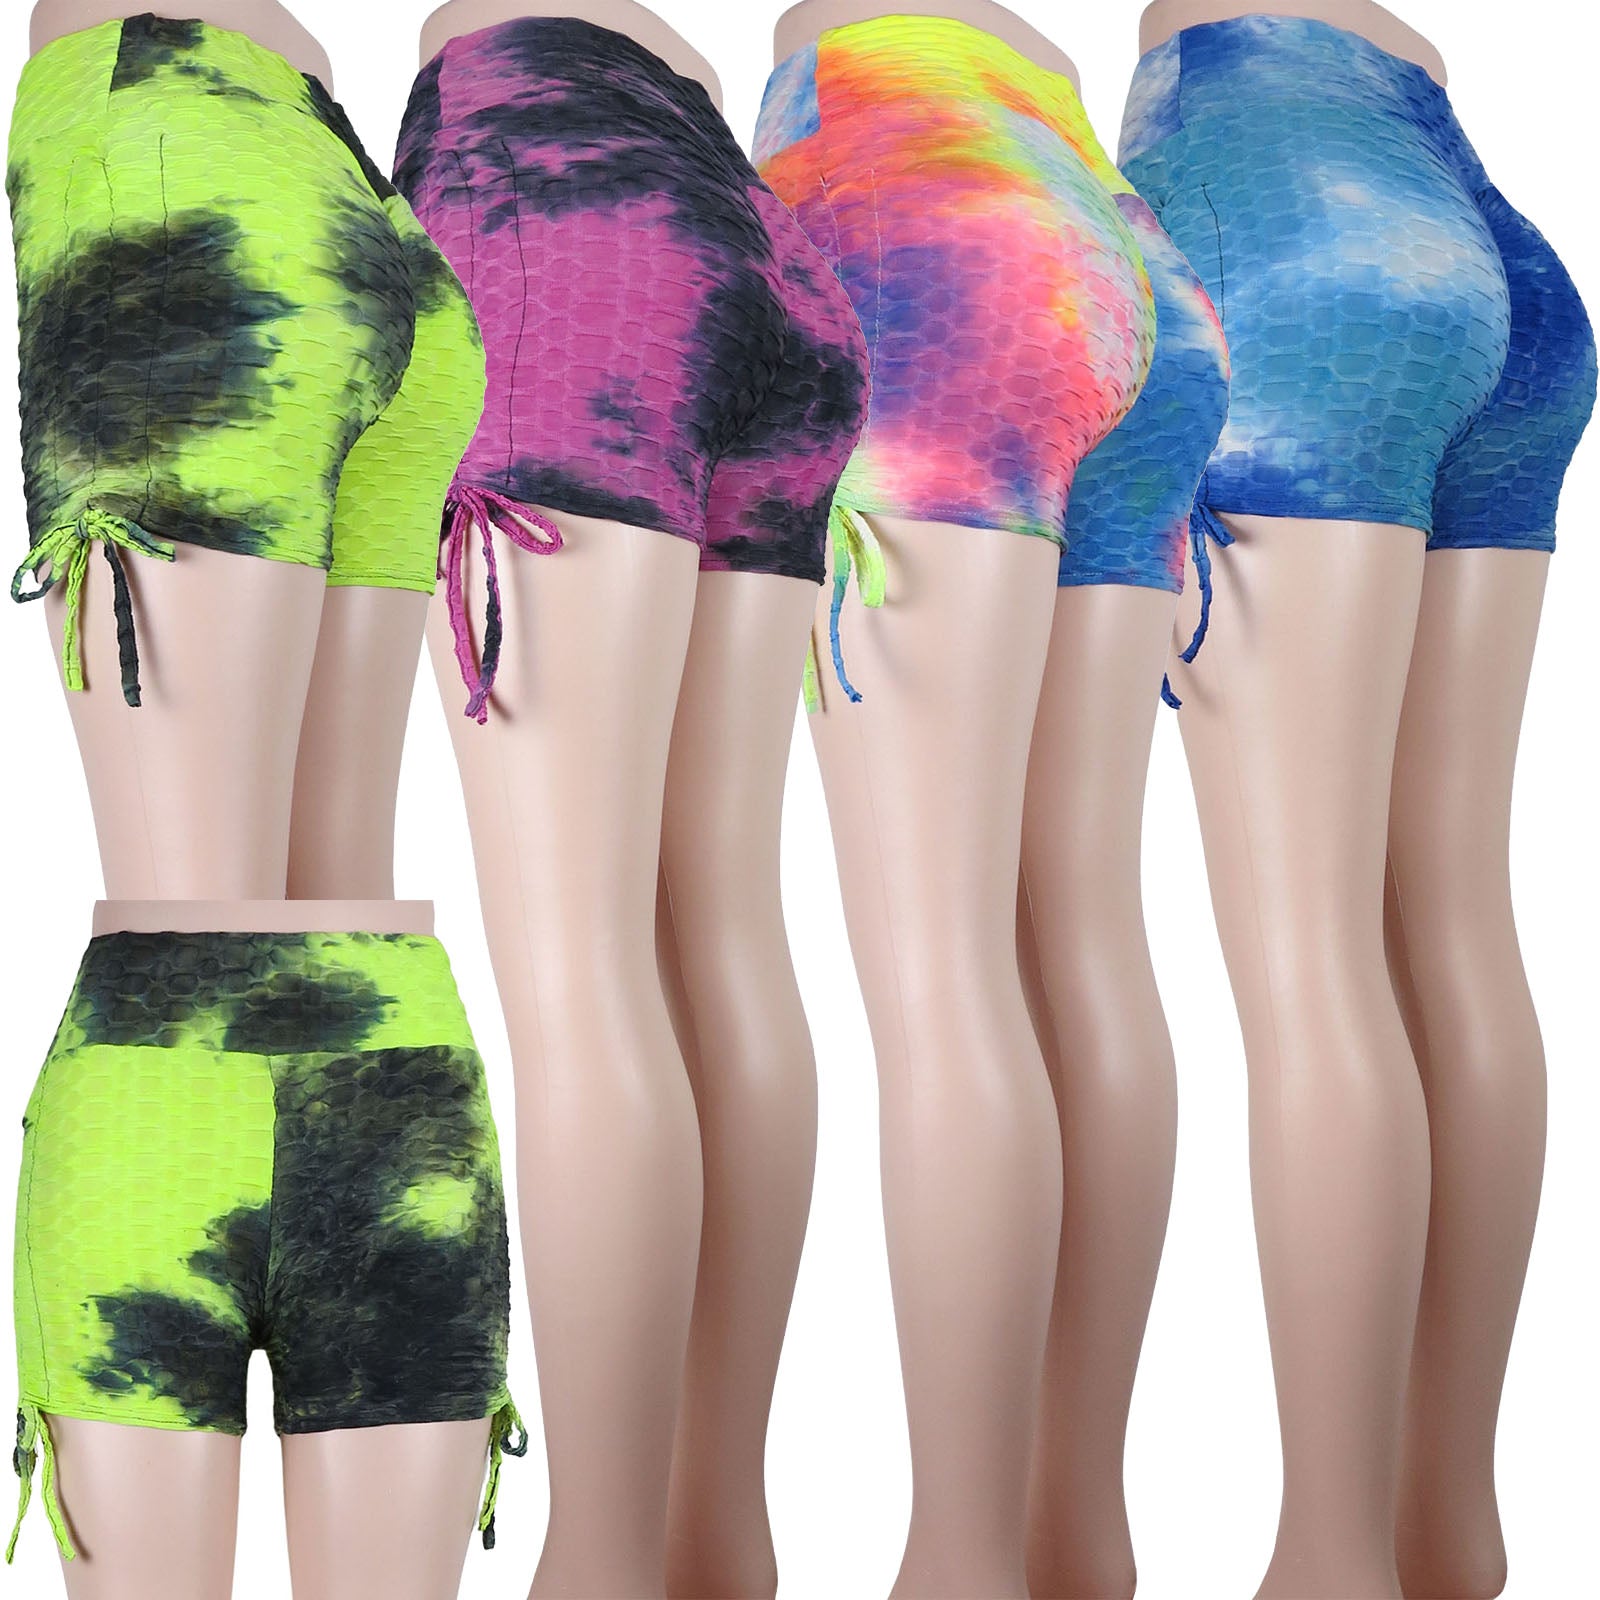 ITEM NUMBER: AP765-RAINBOW (24 PIECE PACK WAS $5.00 - CLEARANCE SALE JUST  $1.50 / PIECE) TIE DYE TIK TOK BOOTY SHORTS HIGH WAIST